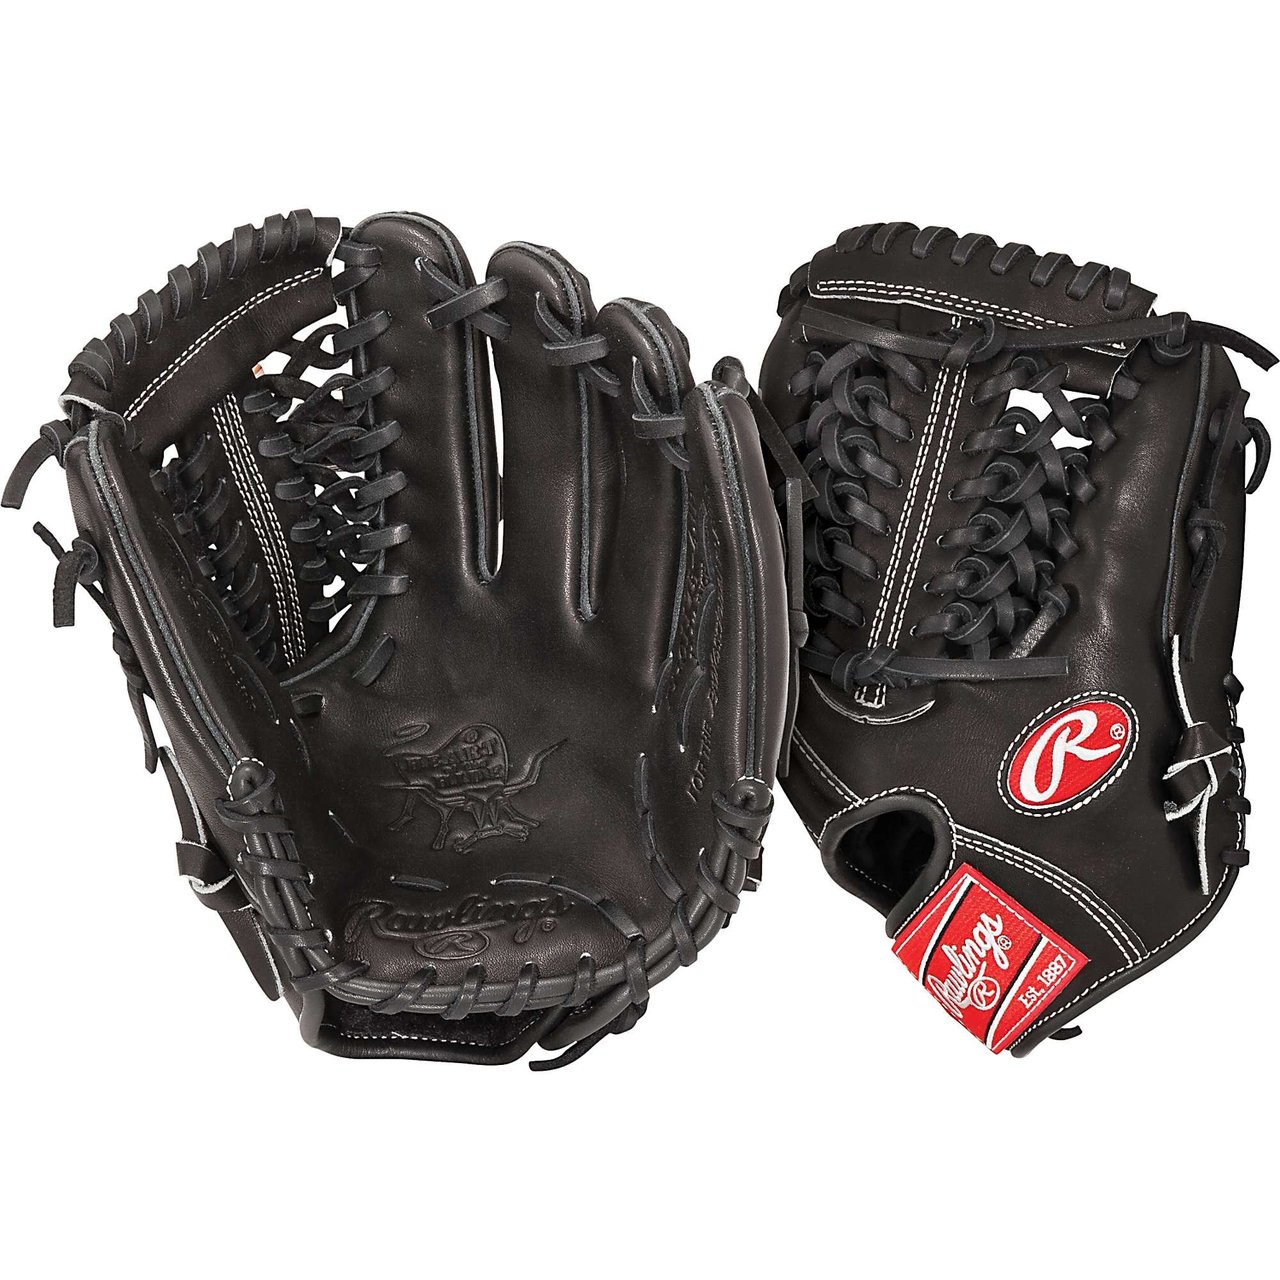 rawlings-pro1175-4jb-heart-of-the-hide-11-75-inch-baseball-glove-right-handed-throw PRO1175-4JB-Right Handed Throw Rawlings New Rawlings PRO1175-4JB Heart of the Hide 11.75 inch Baseball Glove Right